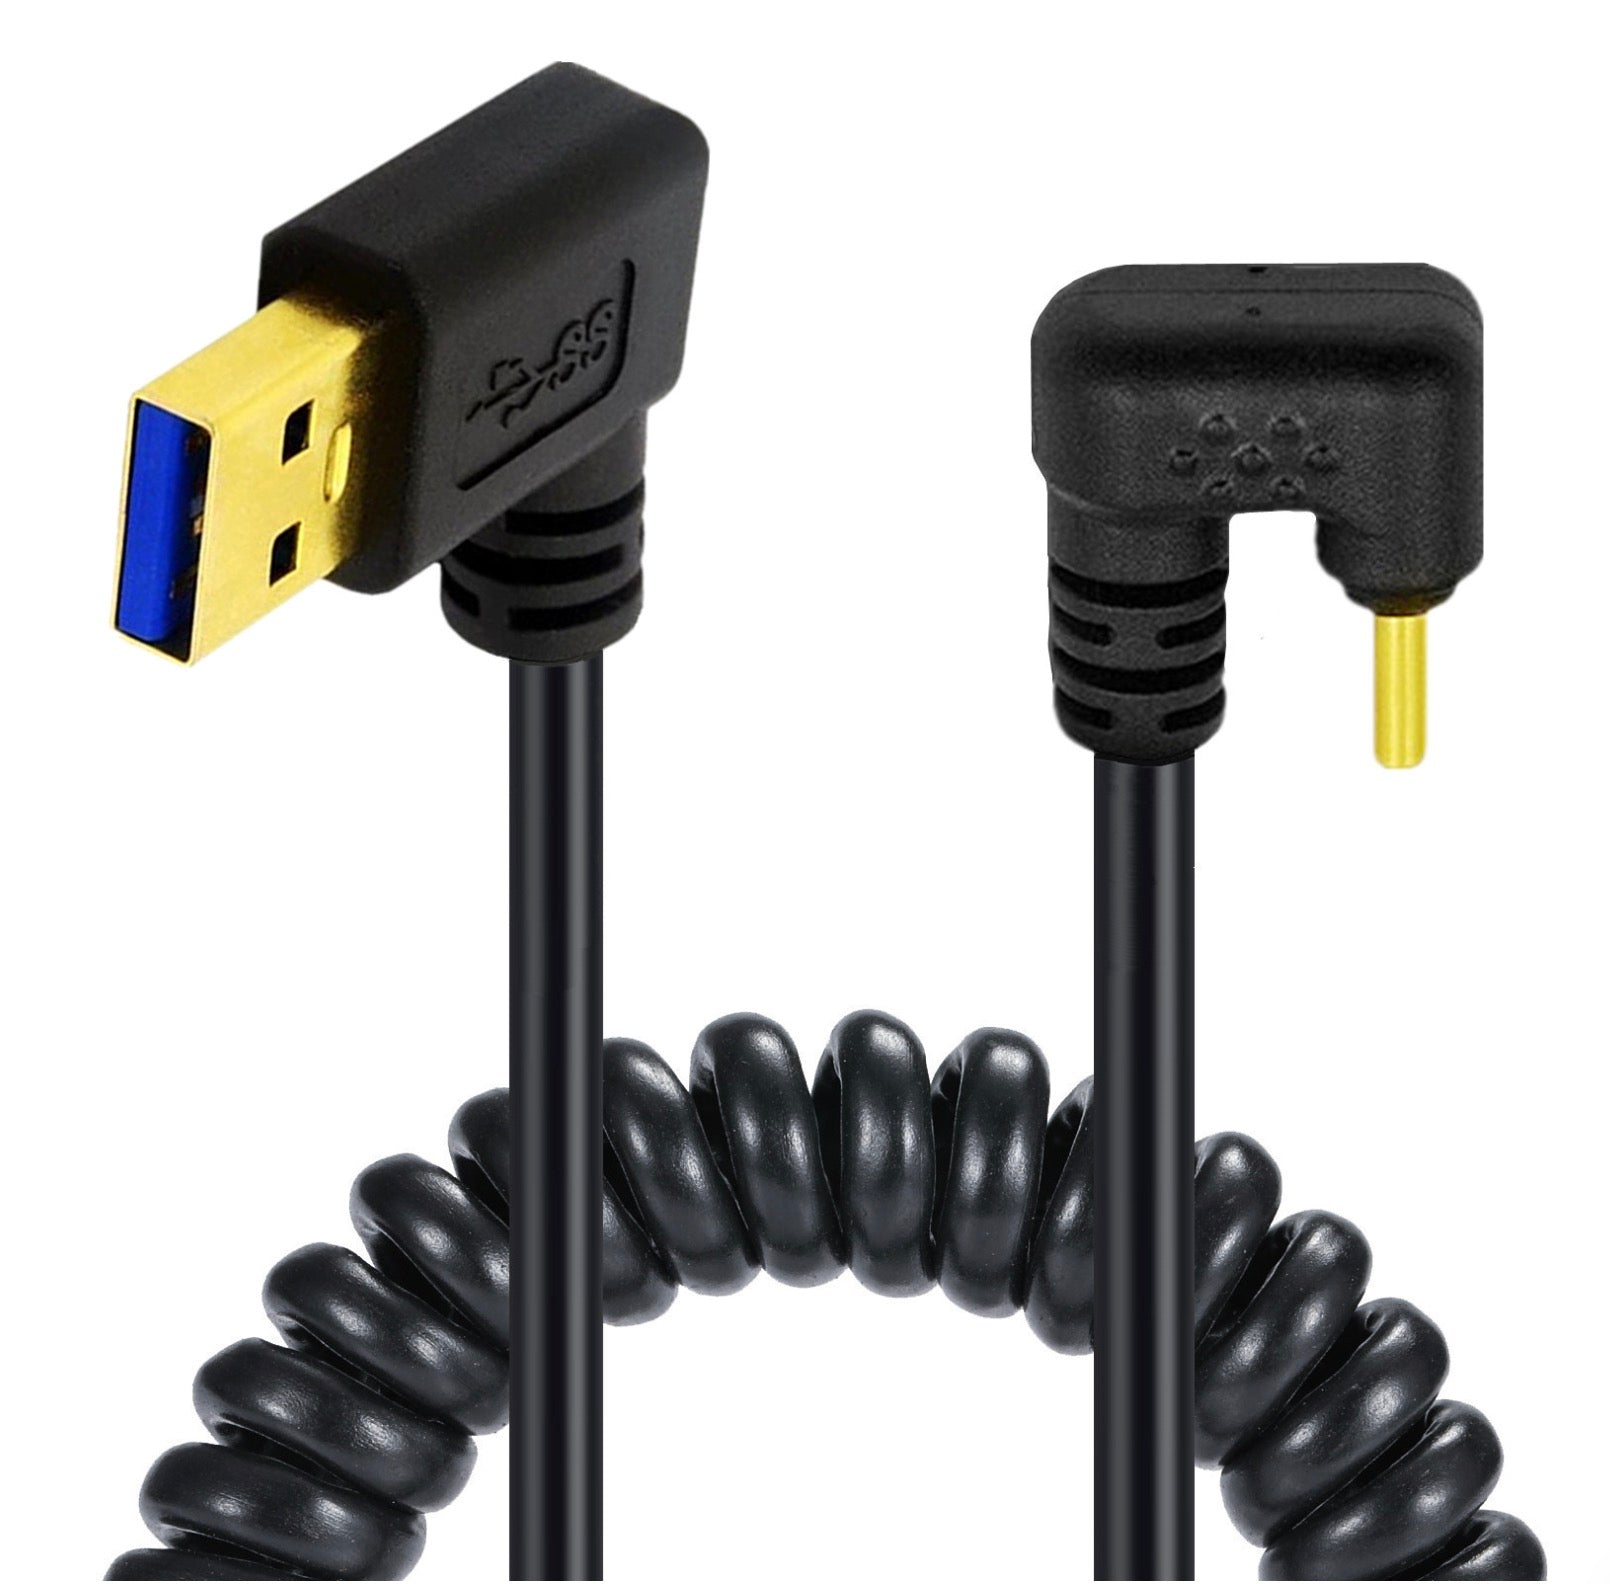 USB C Type-C Male U Shape to USB 3.0 A Male Coiled Cable- Left Angle